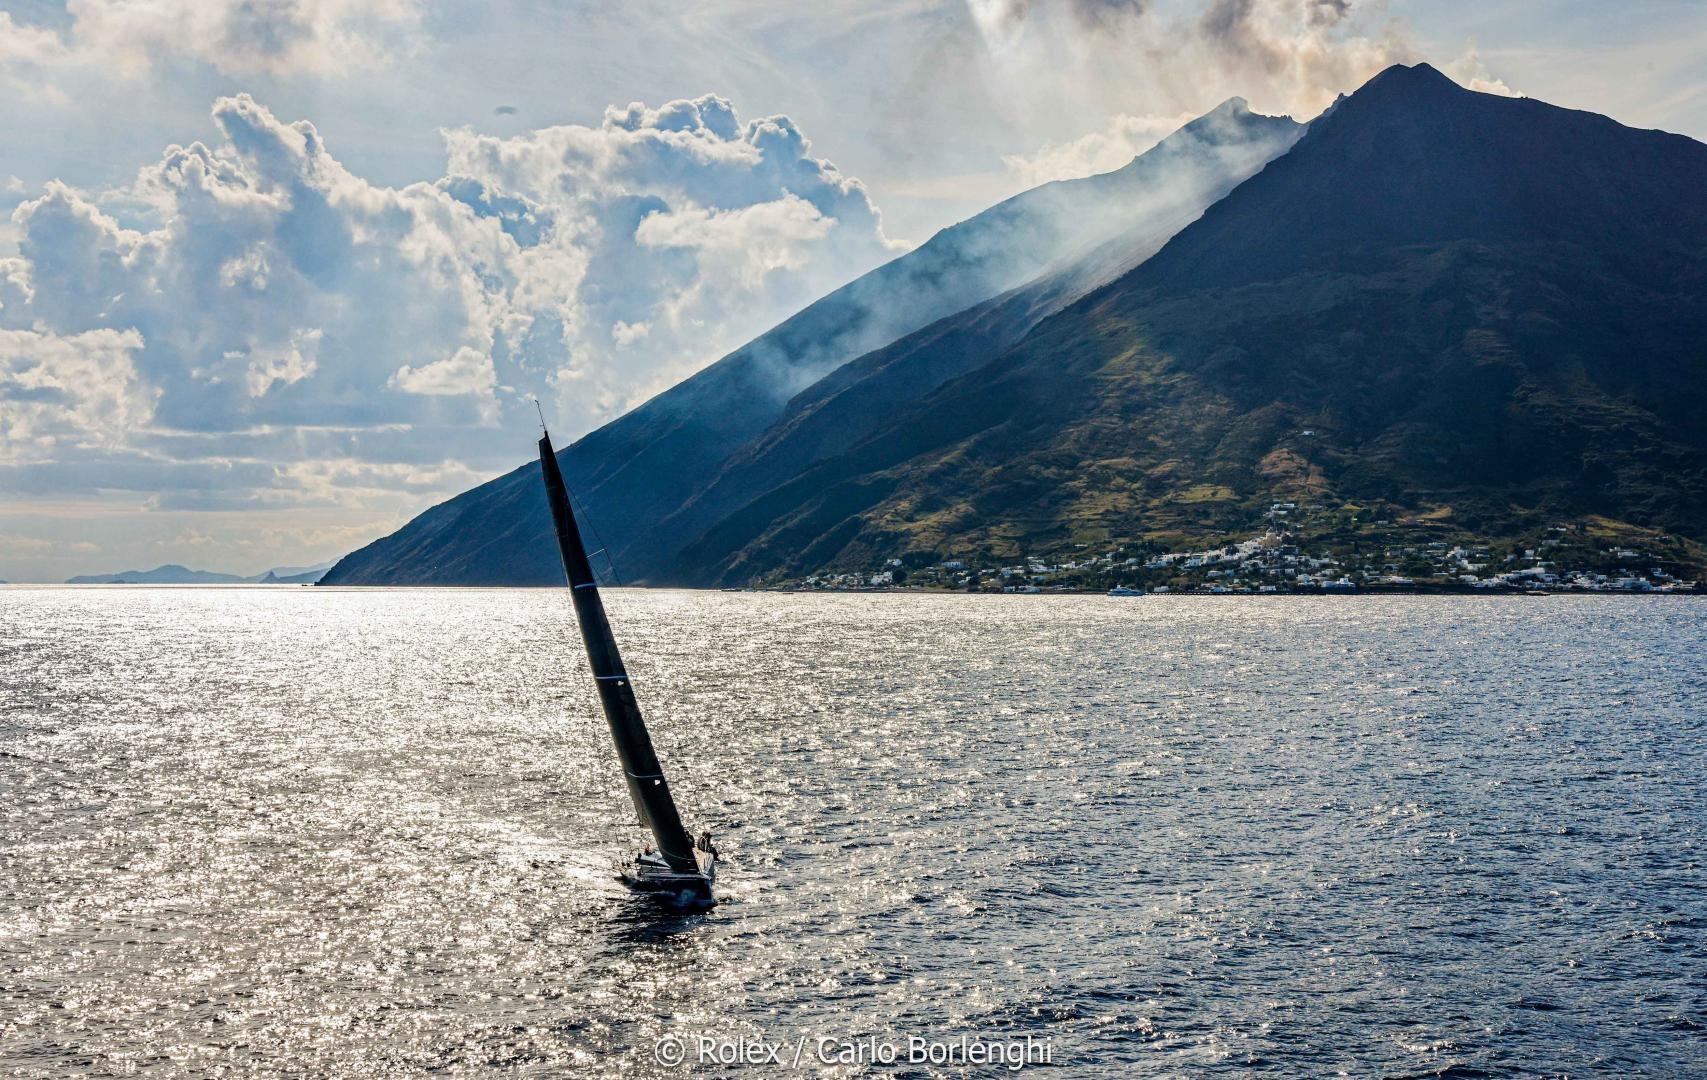 The 41st Rolex Middle Sea Race 2020: the results are in